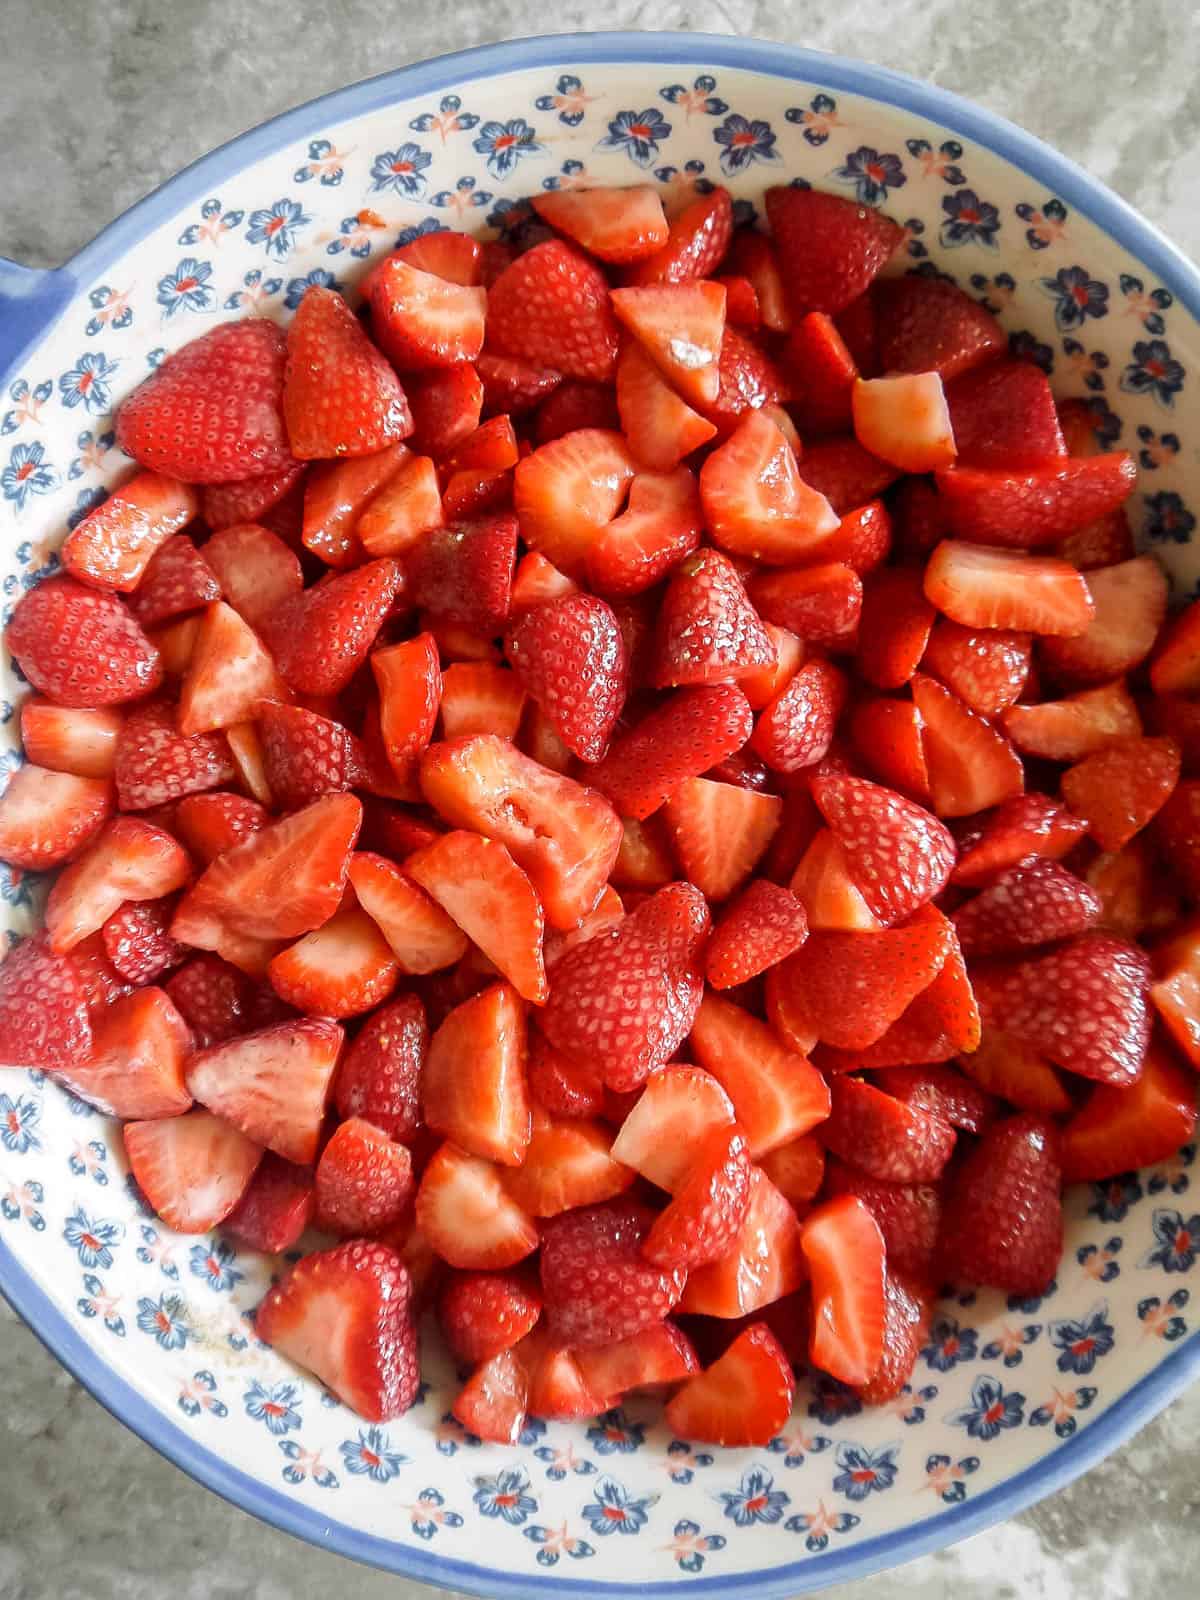 Strawberry filling prepped in a dish.